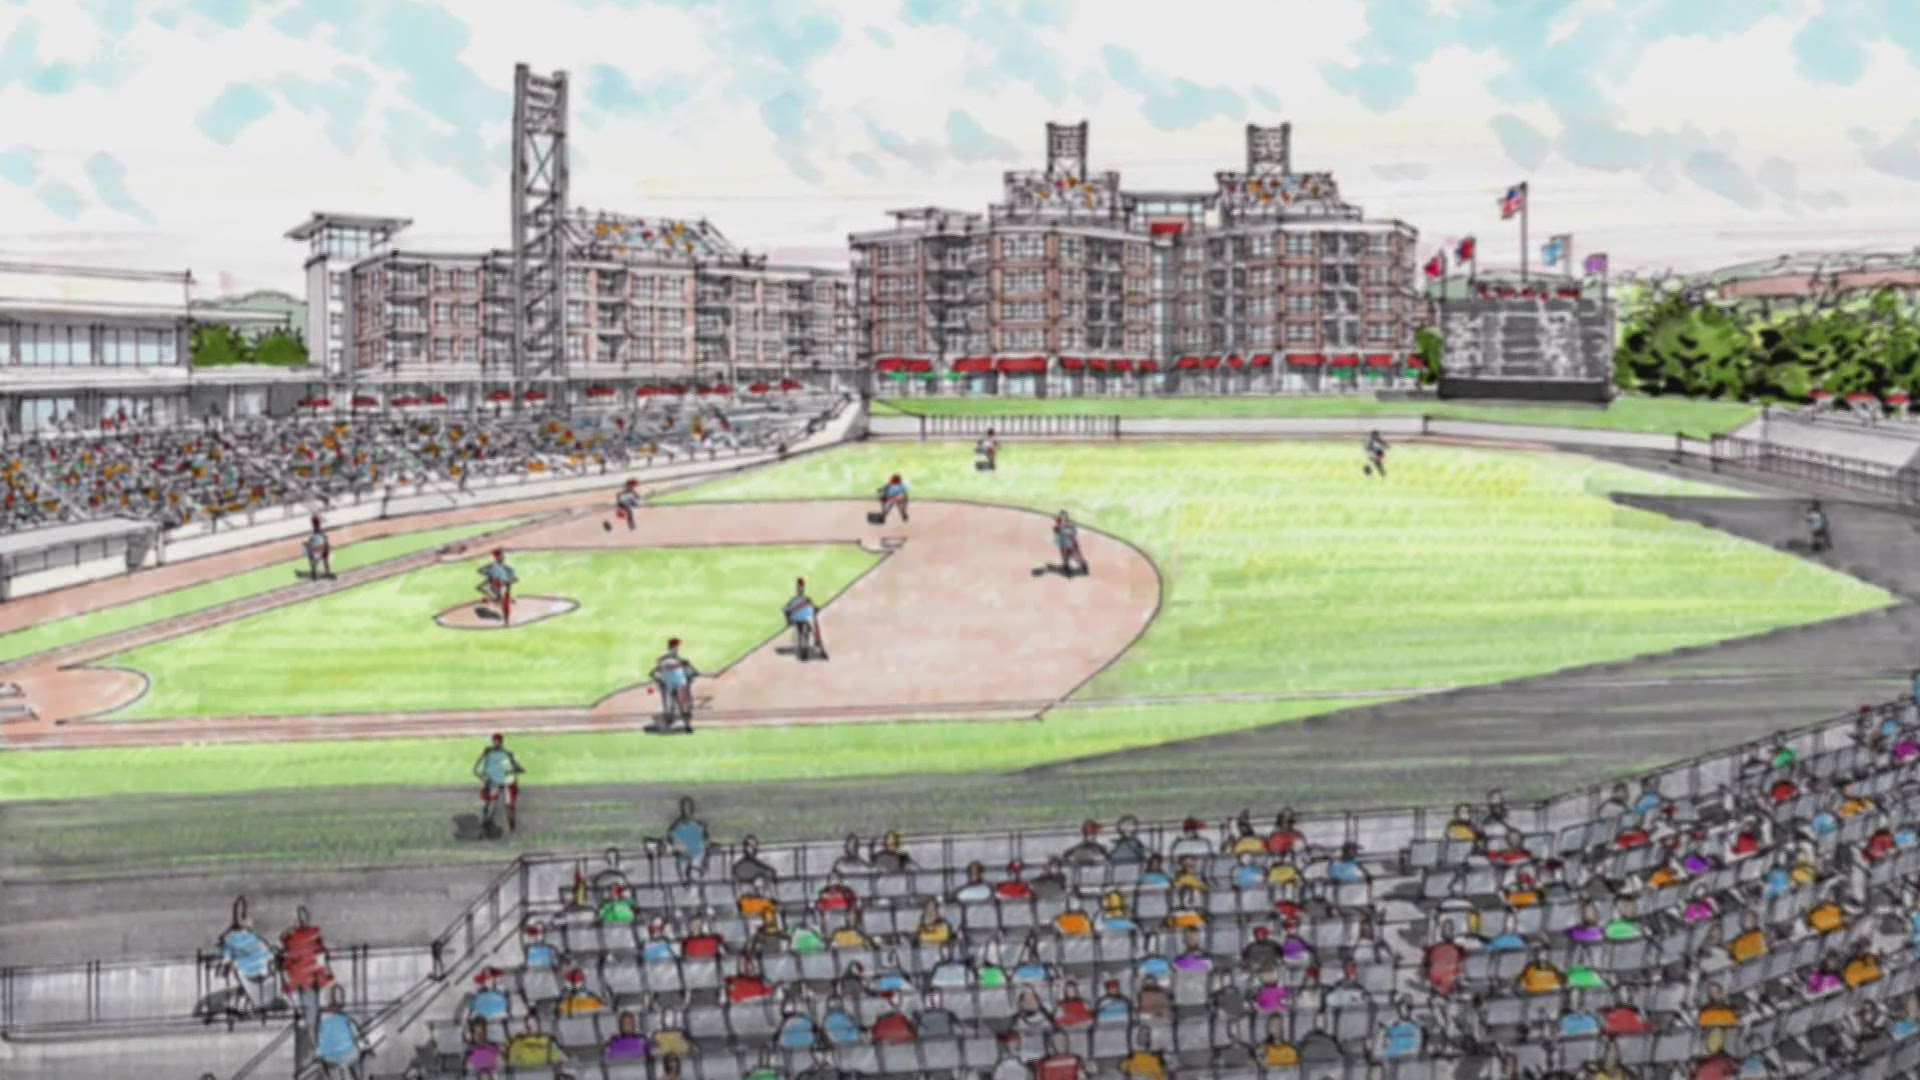 Next week - Knoxville City Council will take up a plan that moves the city one step closer to a minor league baseball stadium.